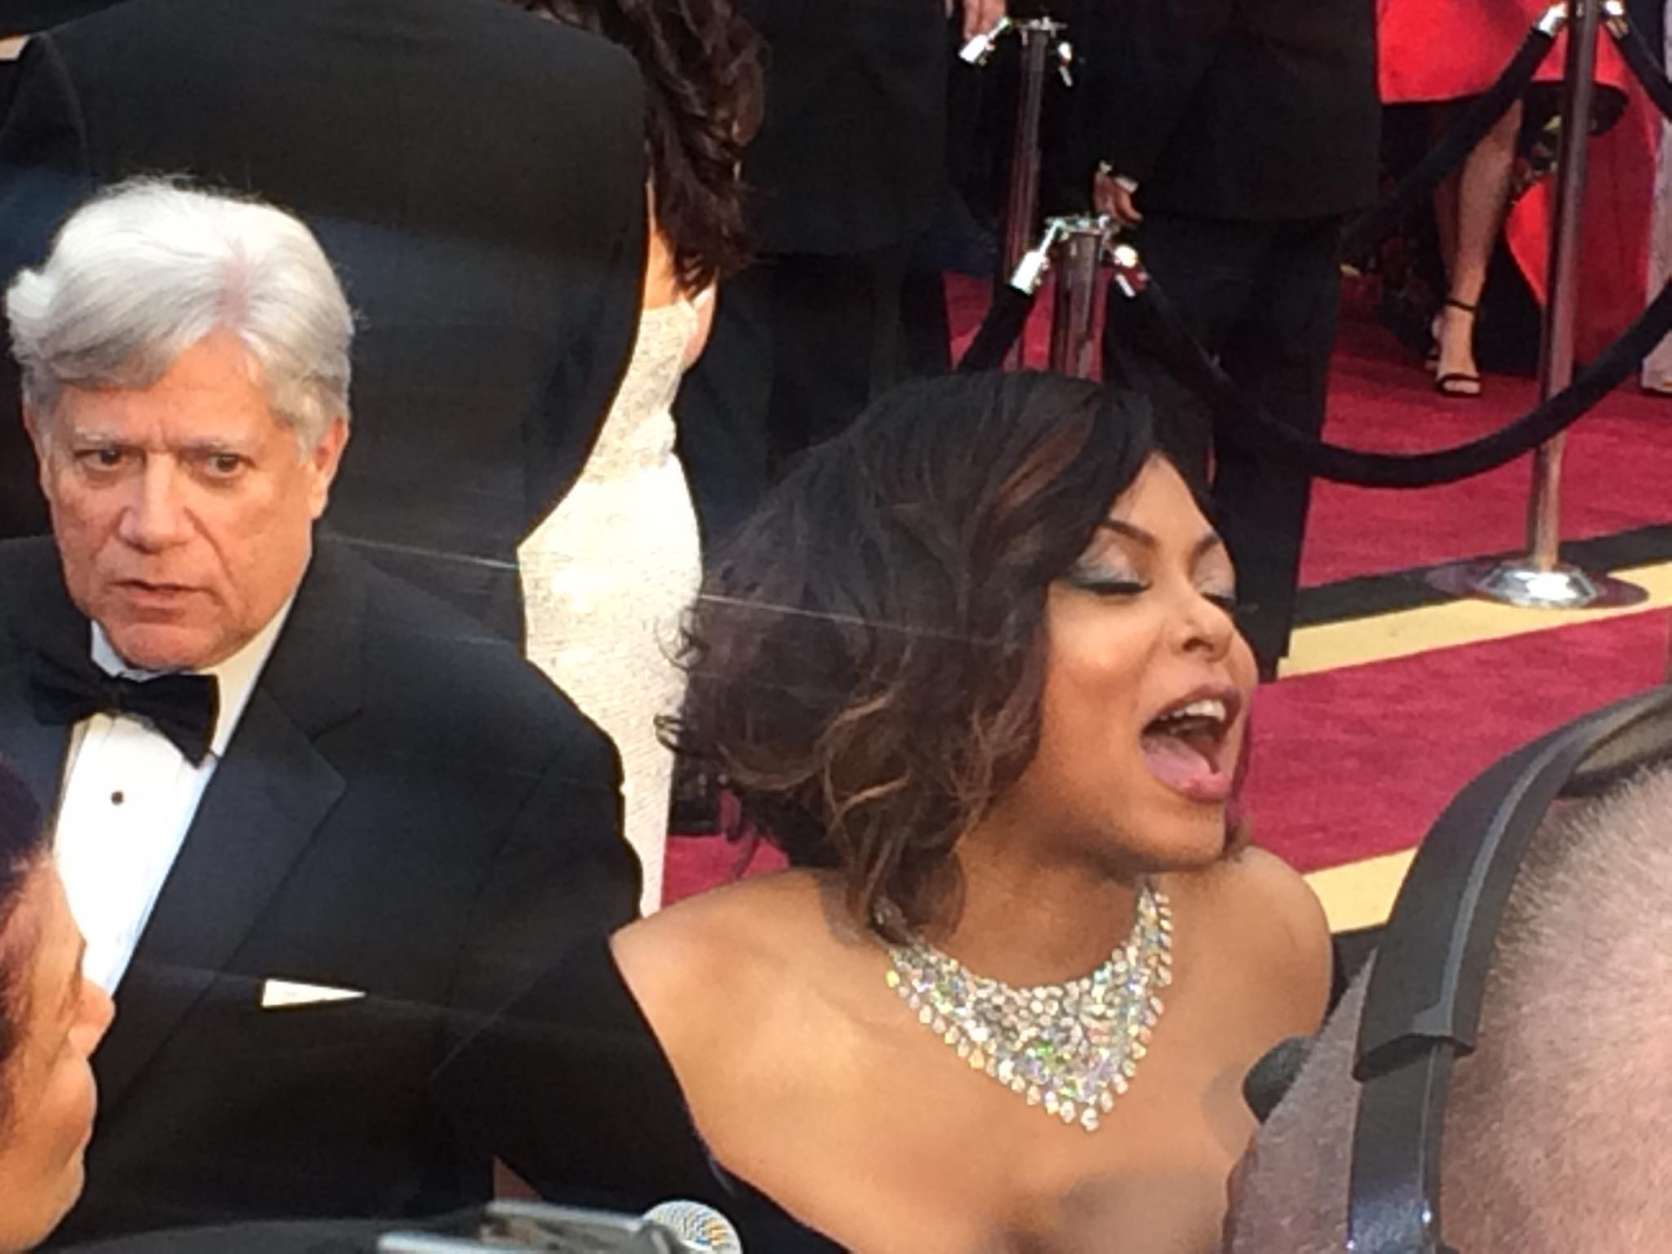 Actress and author Taraji P. Henson on the red carpet. (WTOP/Jason Fraley)